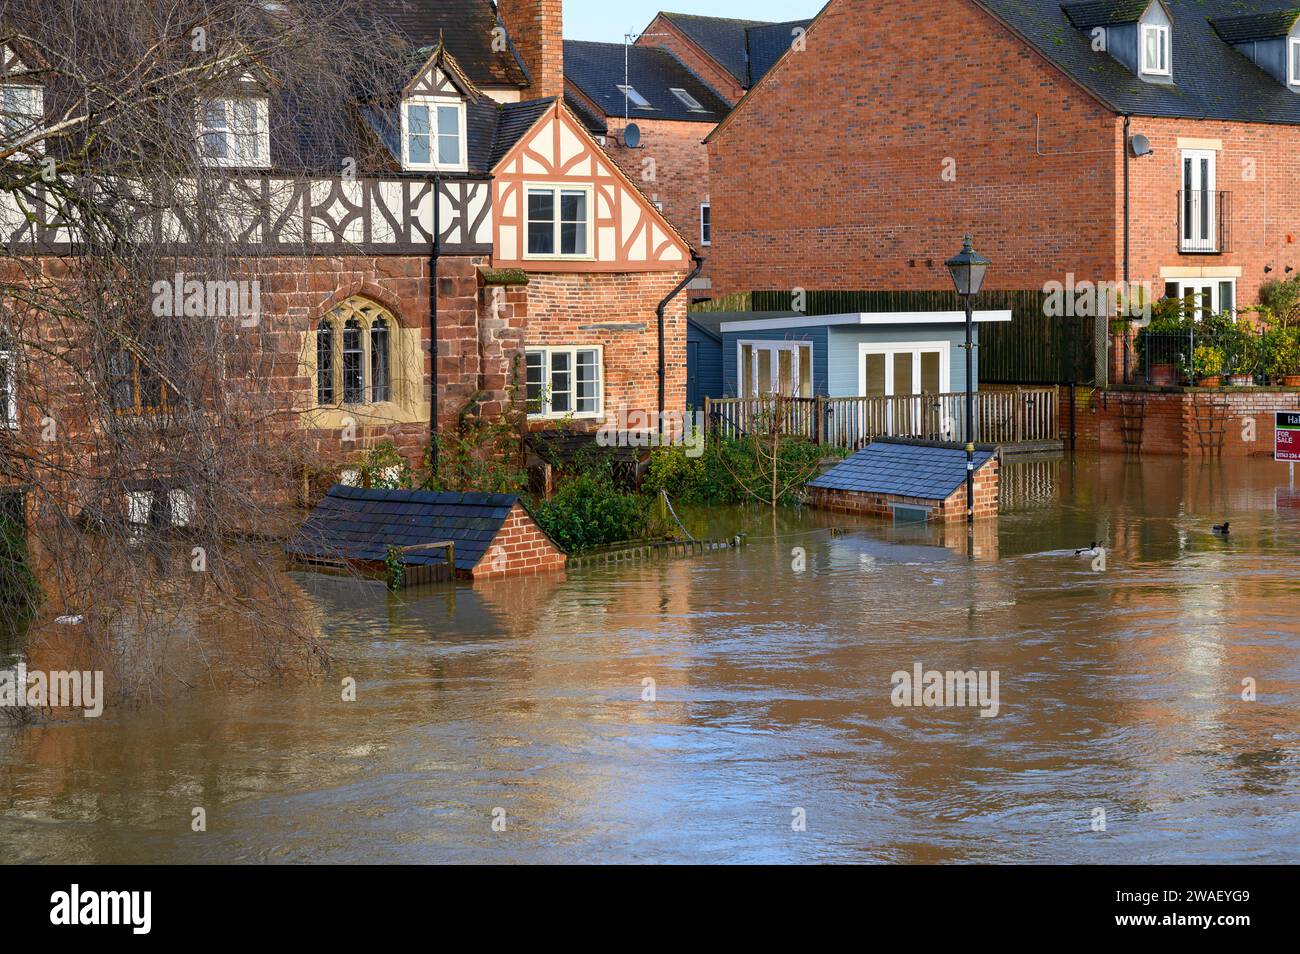 Flooding affected properties and businesses in Shrewsbury after the River Severn burst its banks as a result of heavy rainfall due to Storm Henk. Stock Photo